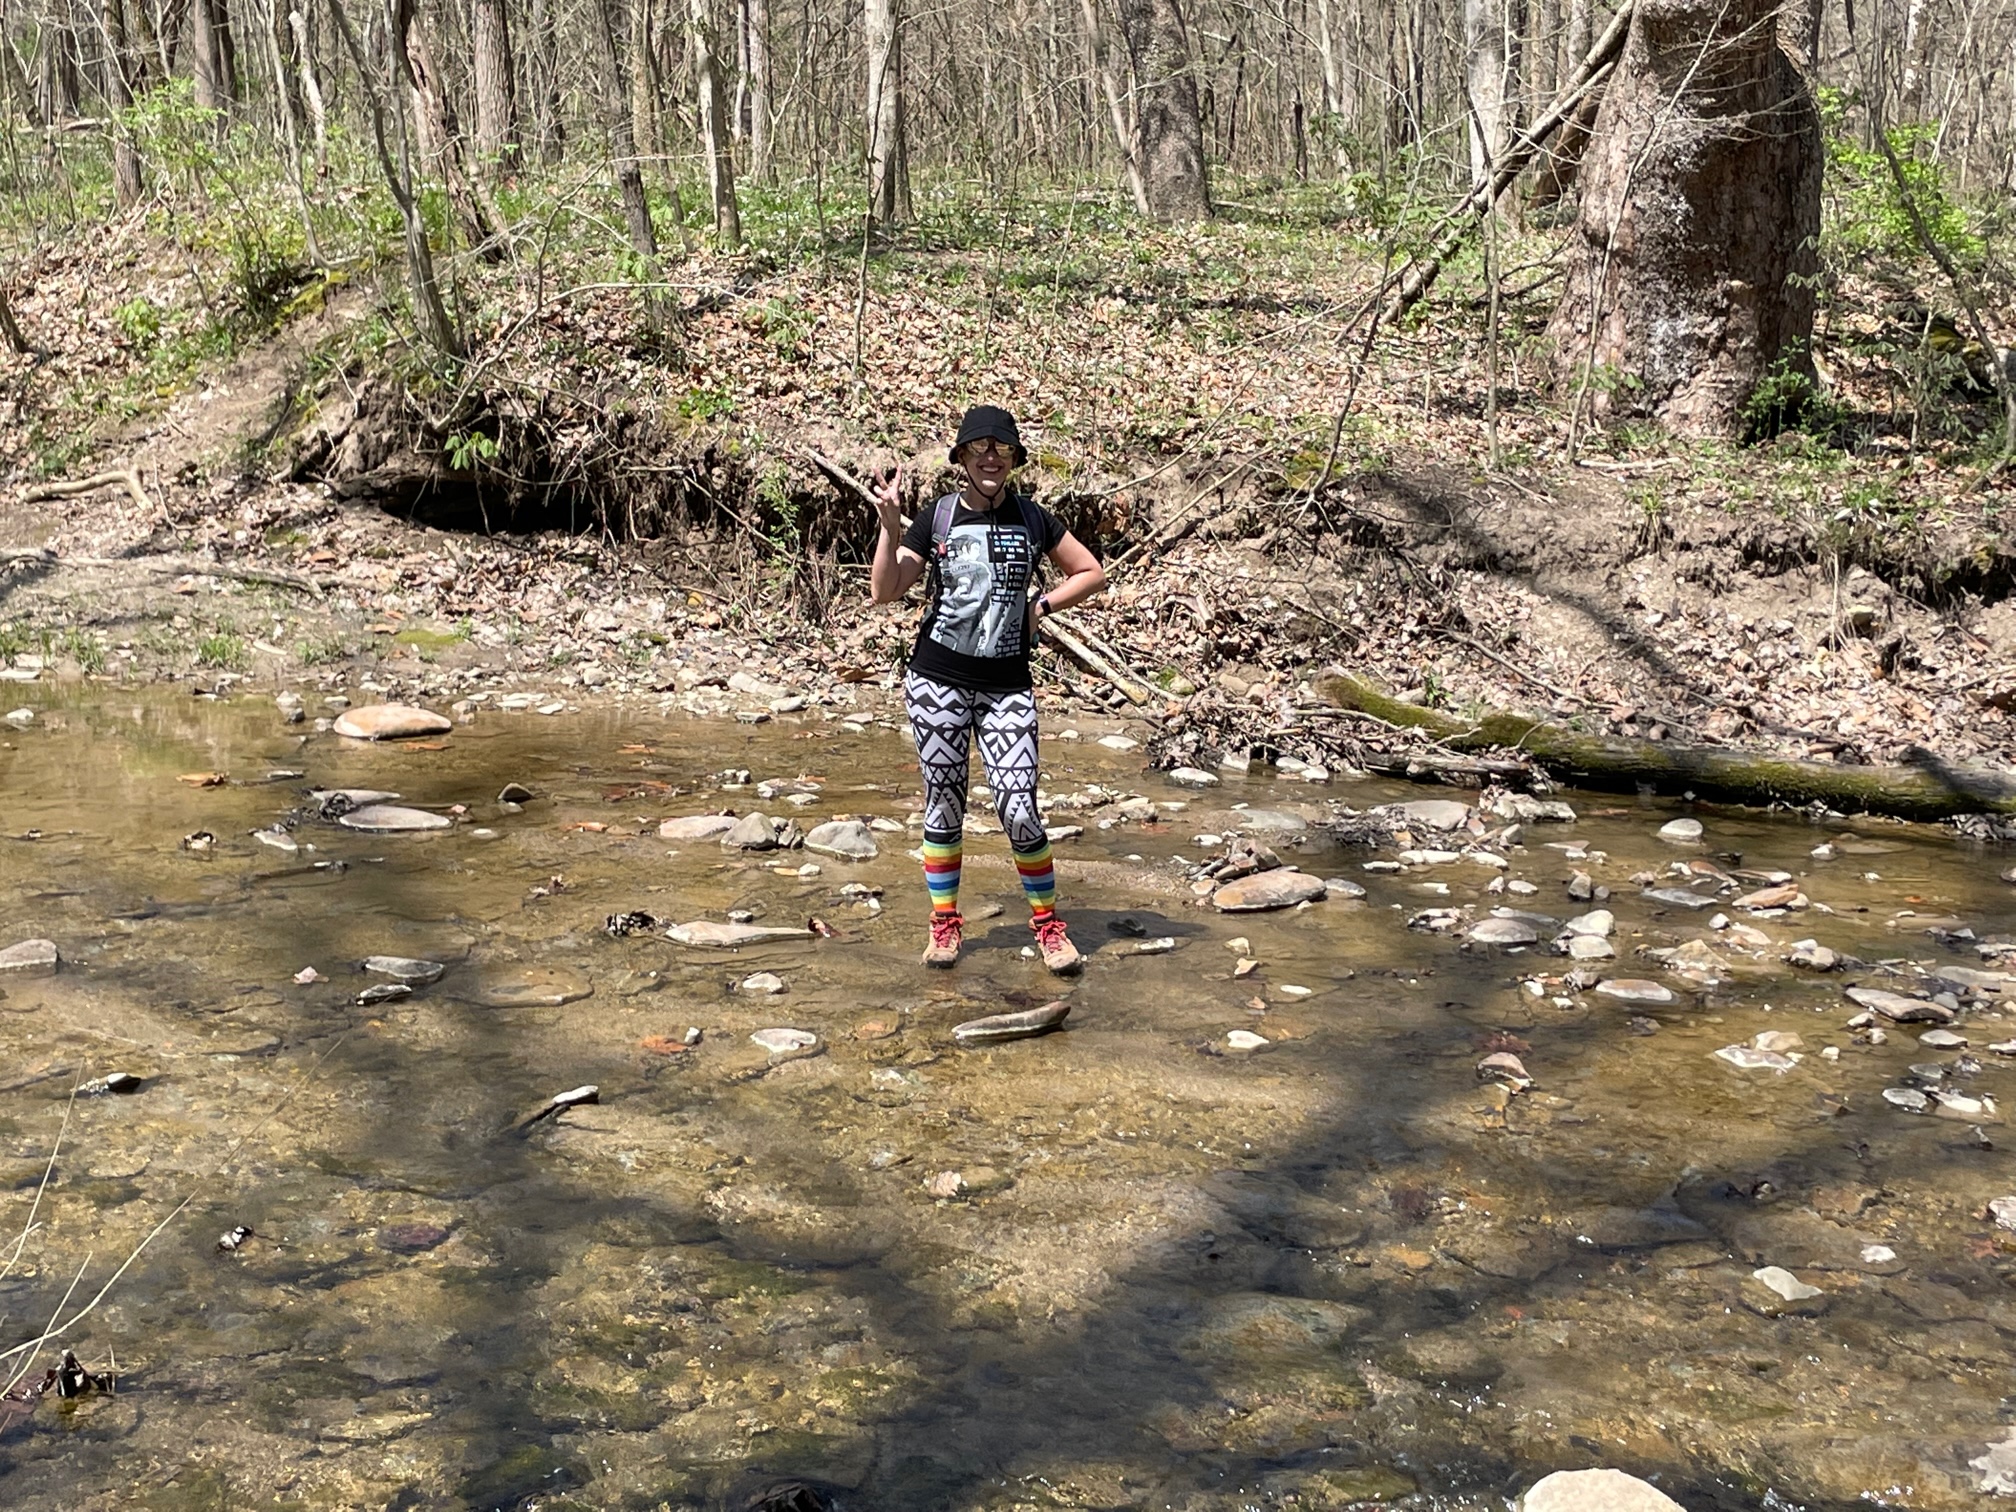 Photo of author Mara Thacker standing in the middle of a shallow stream with rocks. There are trees in the background, main colors in the are browns and greens.